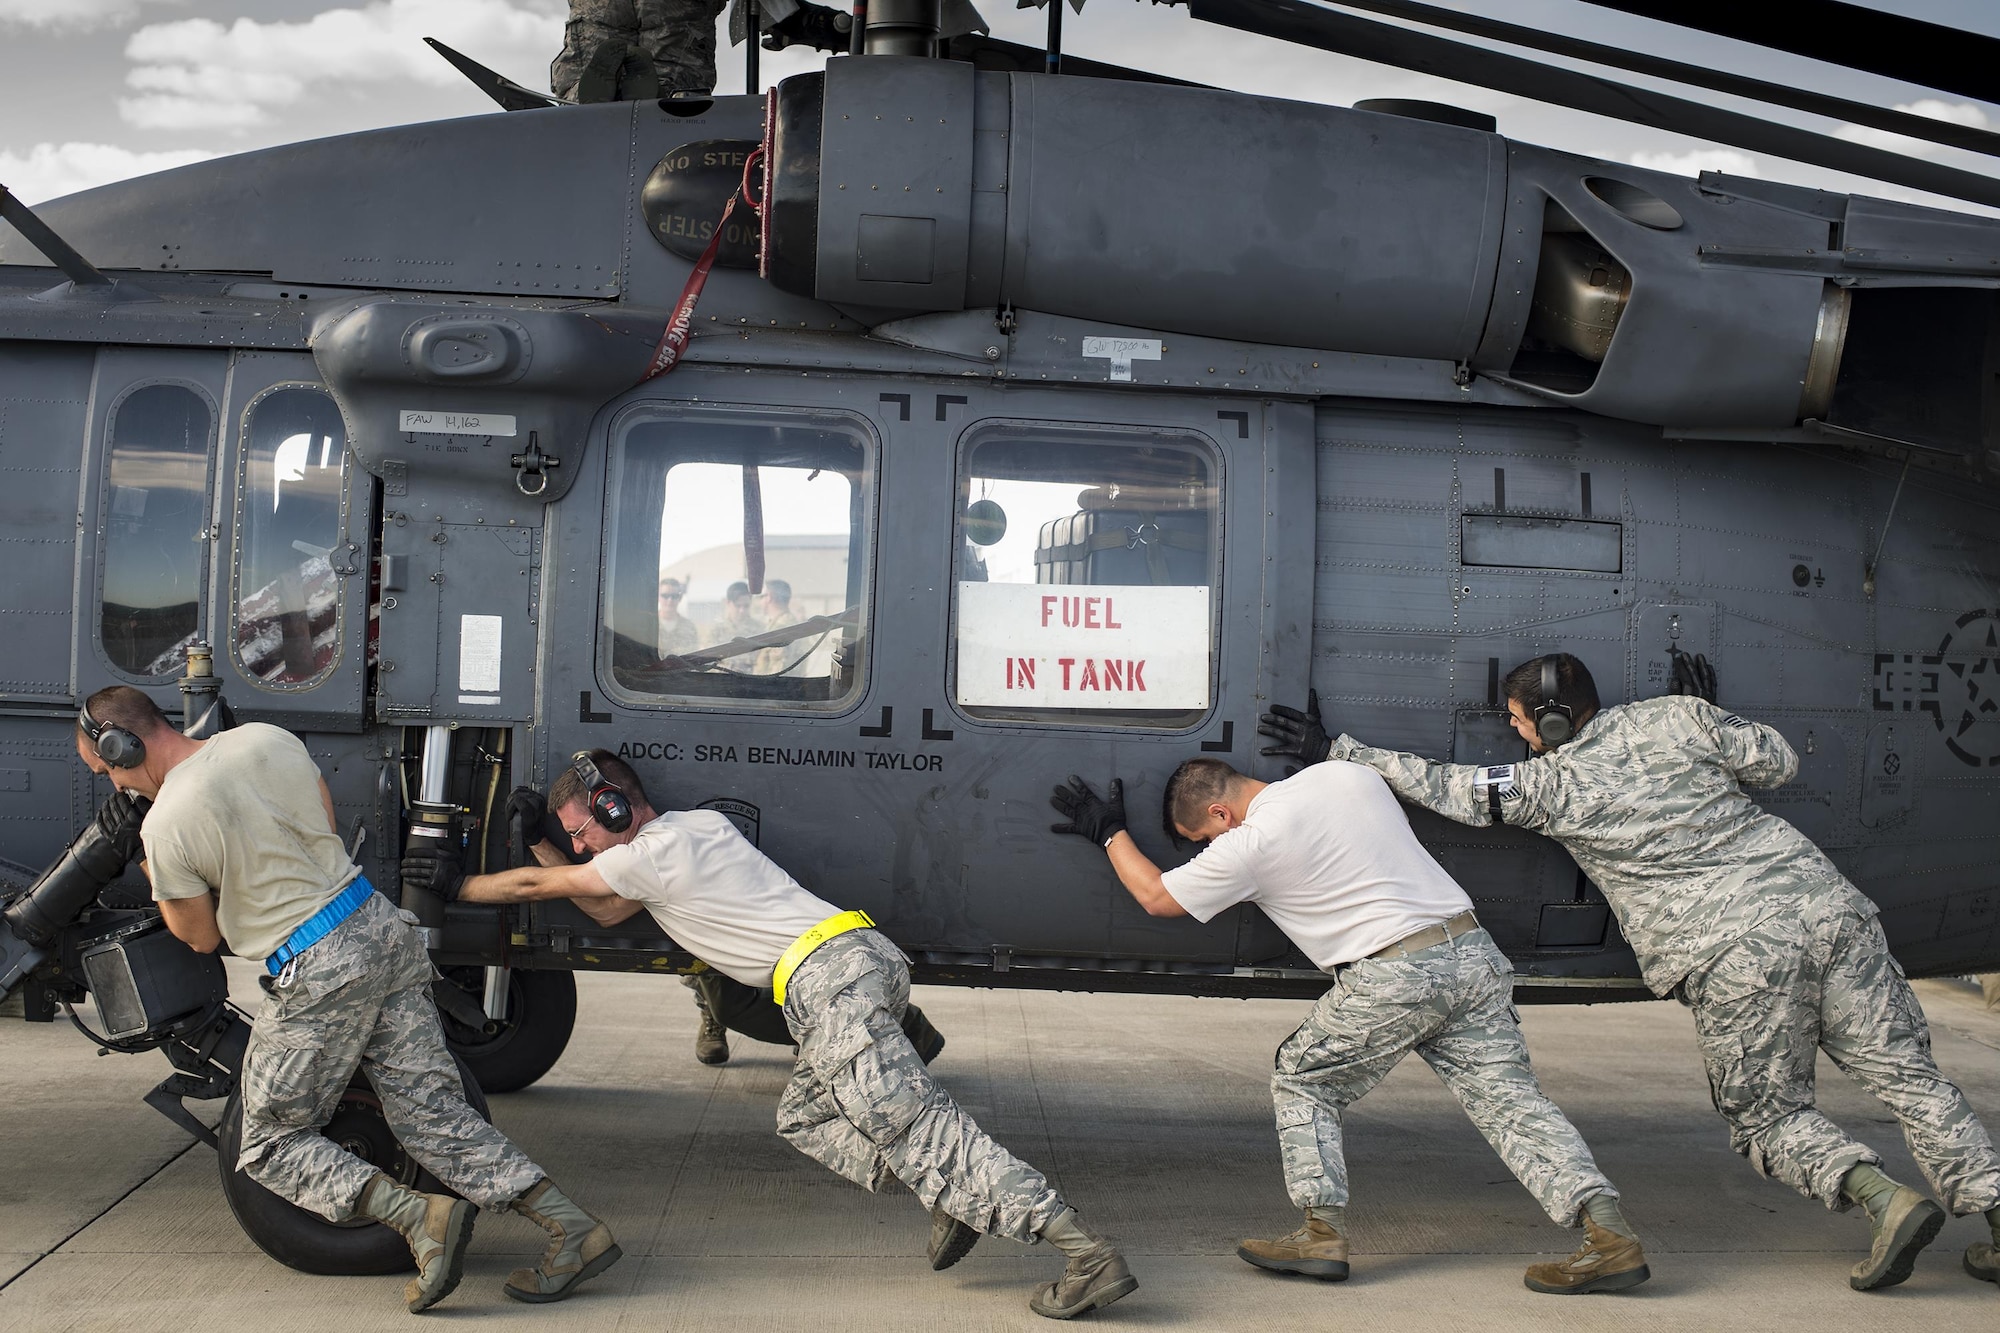 Airmen from the 41st Helicopter Maintenance Unit and the 325th Logistics Readiness Squadron unload an HH-60G Pave Hawk, assigned to the 41st Rescue Squadron, from a C-17 Globemaster III, during a rapid-rescue exercise, Nov. 1, 2016, at Tyndall Air Force Base, Fla. The first stage of the exercise tested Moody’s ability to quickly deploy rescue aircraft and personnel to an austere environment. (U.S. Air Force photo by Staff Sgt. Ryan Callaghan)
